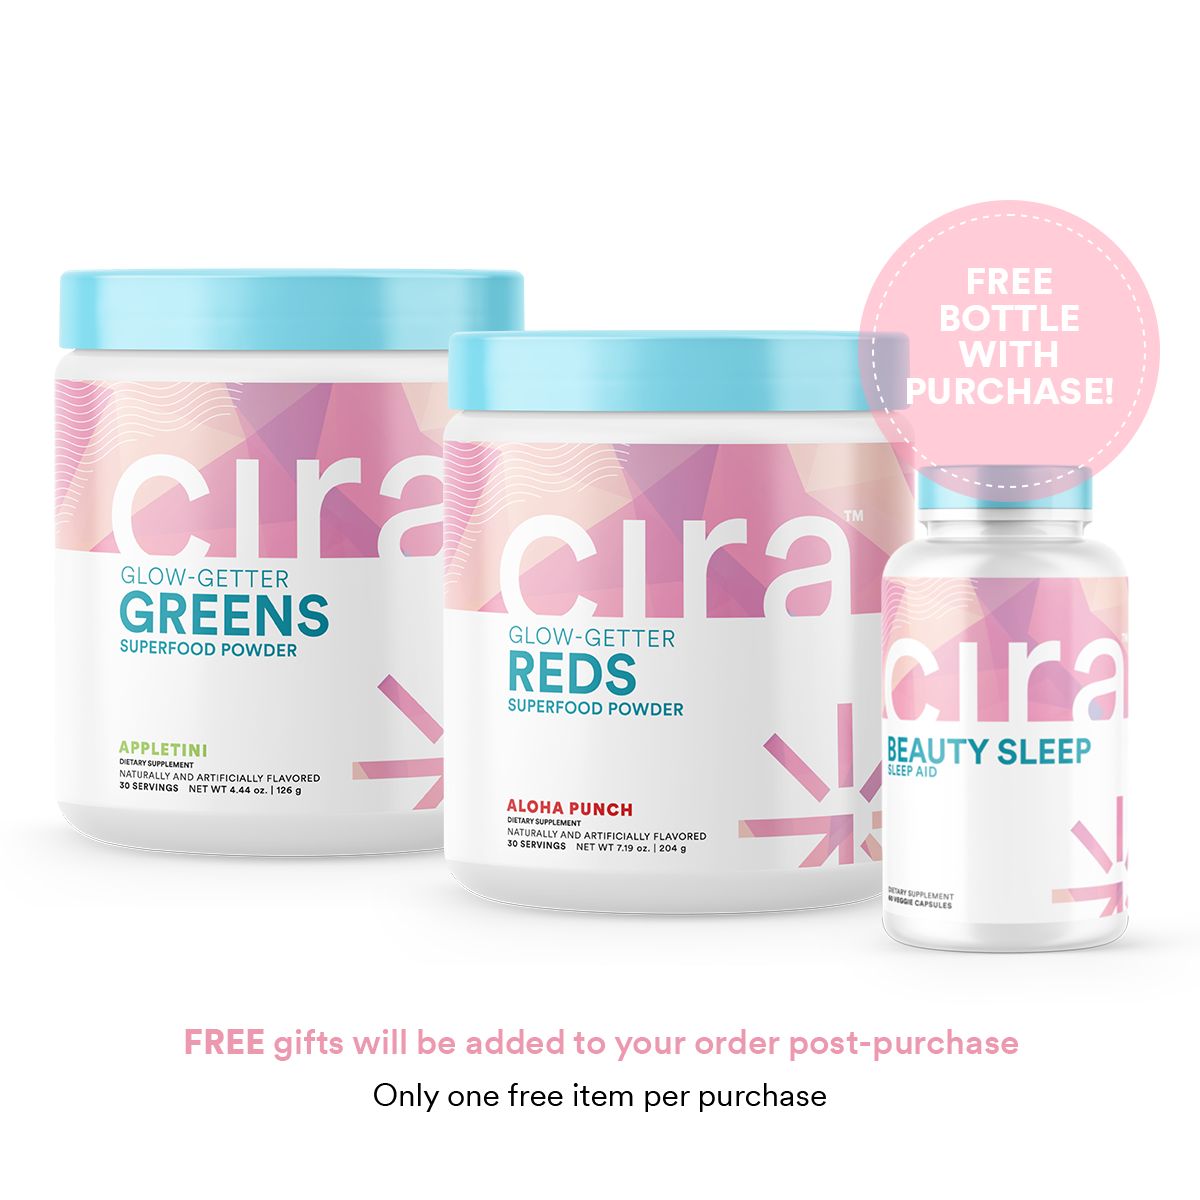 Cira Nutrition's Glow-getter greens and reds with a free beauty sleep bottle